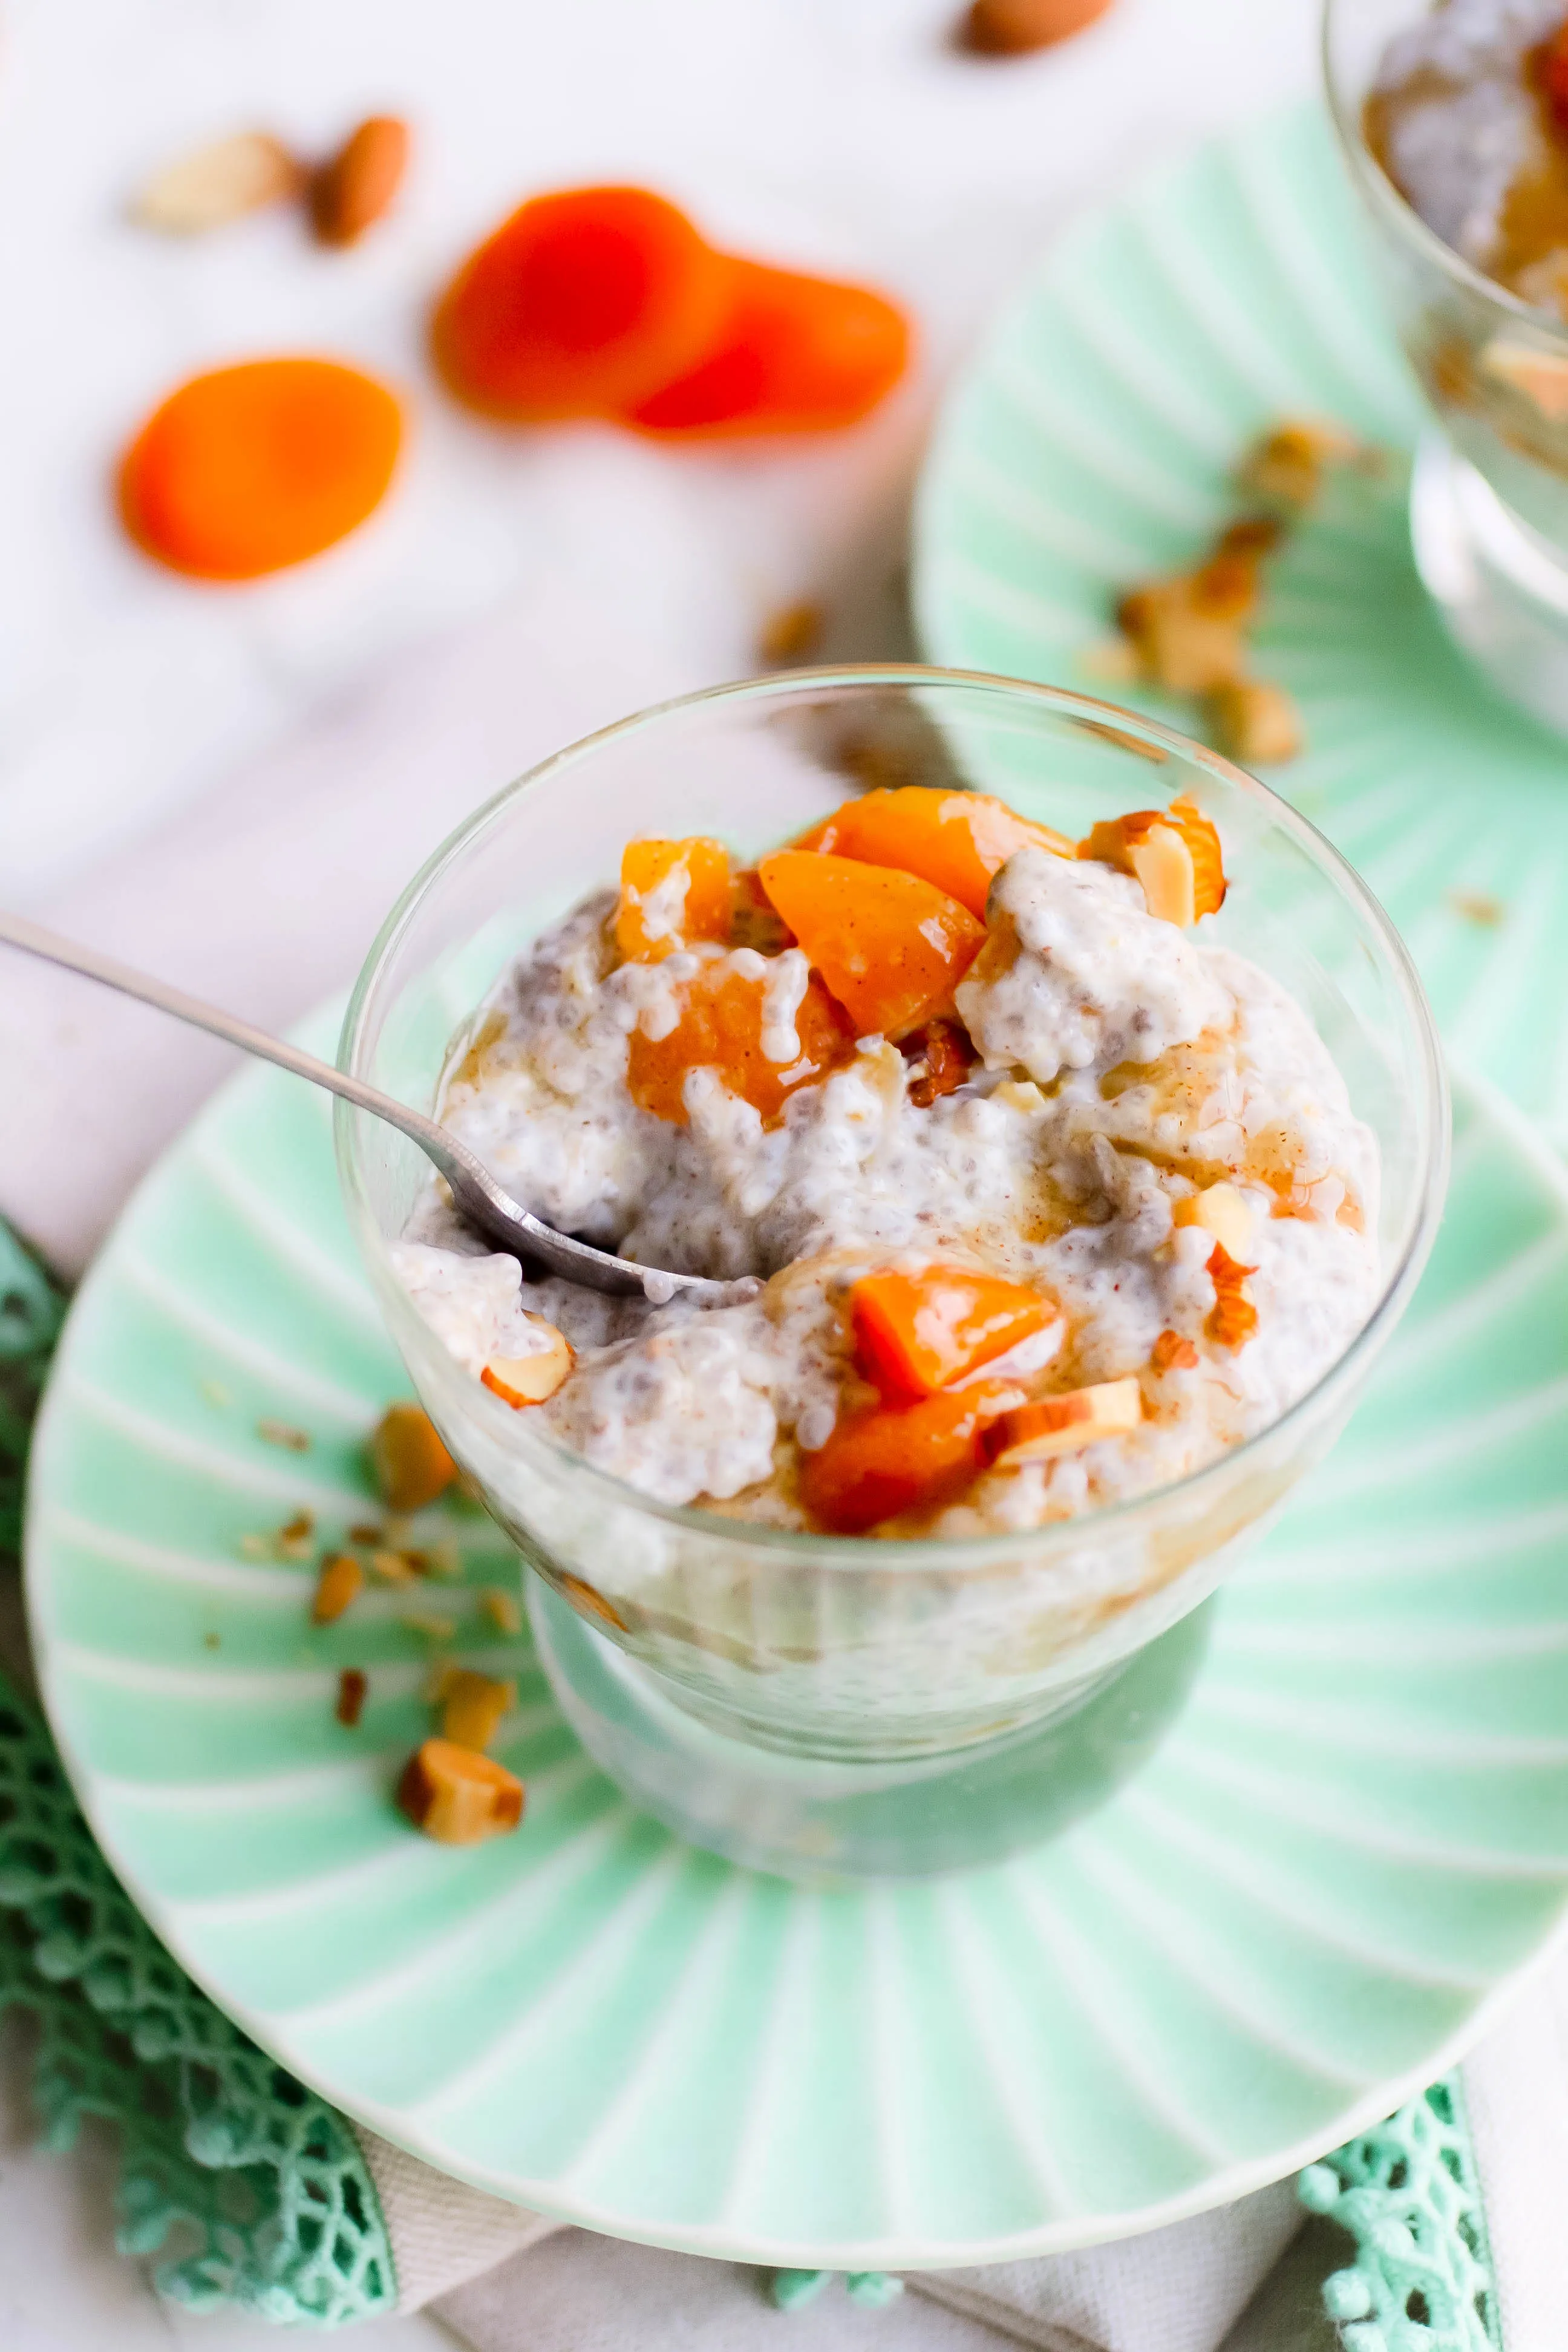 Almond-Apricot Breakfast Chia Pudding is a lovely dish to dig into! Wake up to Almond-Apricot Breakfast Chia Pudding!